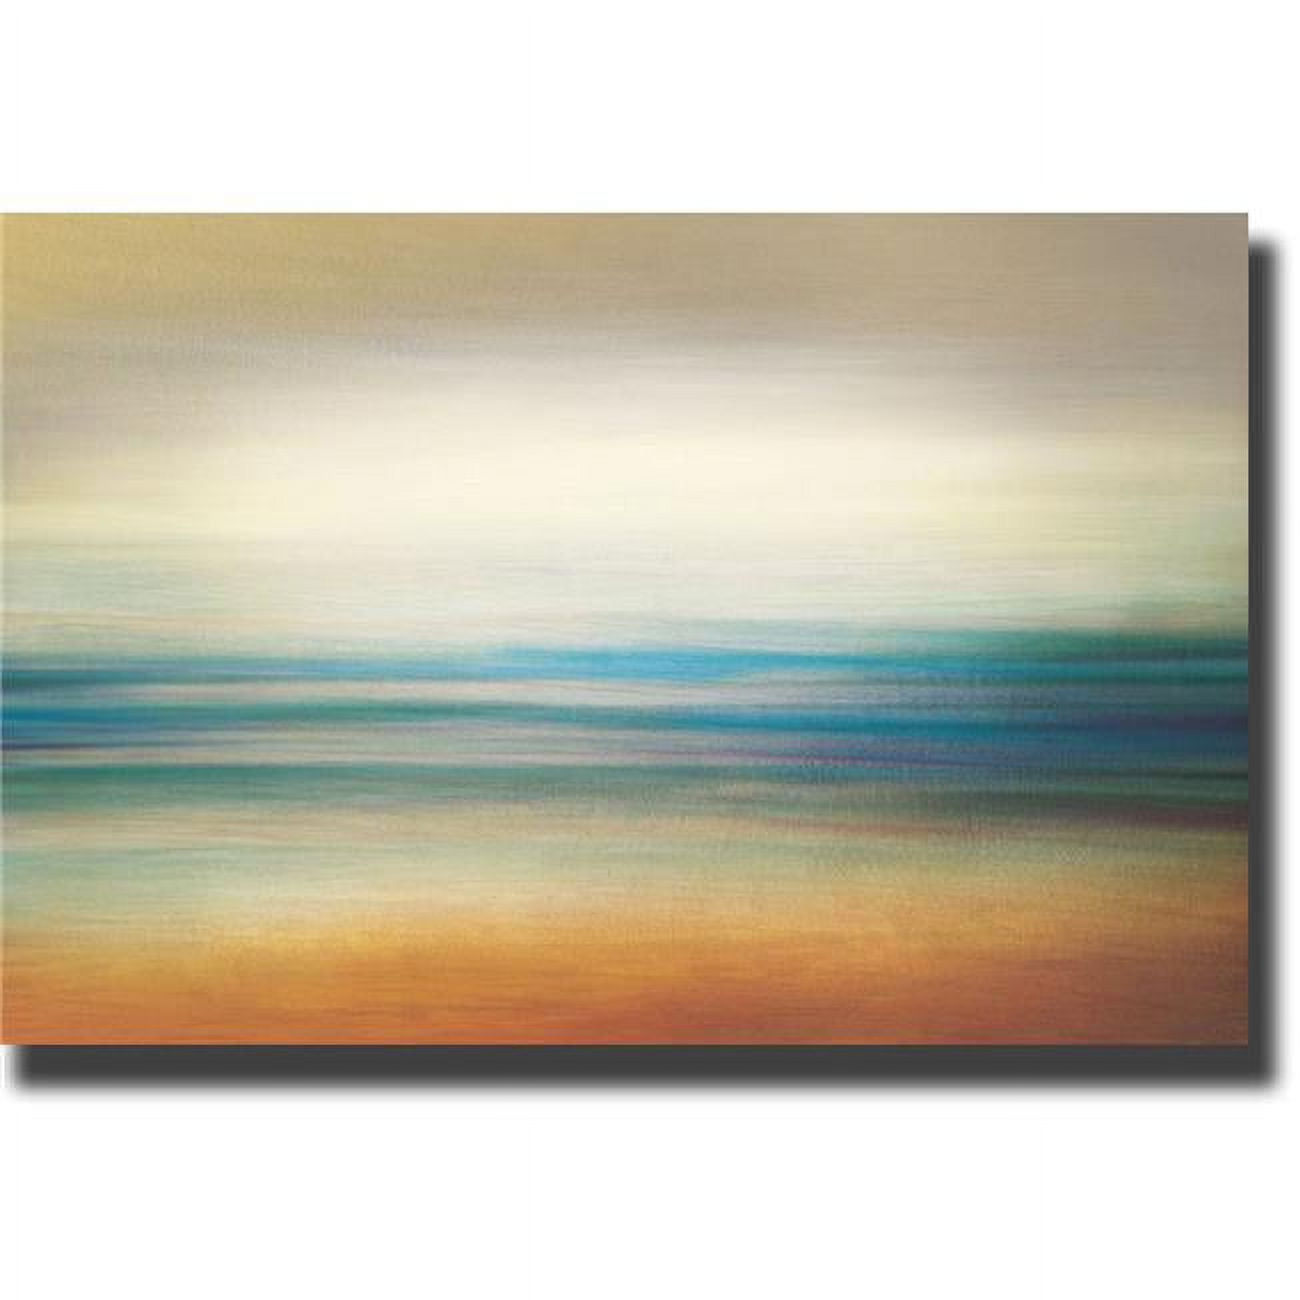 2436z734cg La Playa By Tandi Venter Premium Gallery-wrapped Canvas Giclee Art - Ready-to-hang, 24 X 36 X 1.5 In.